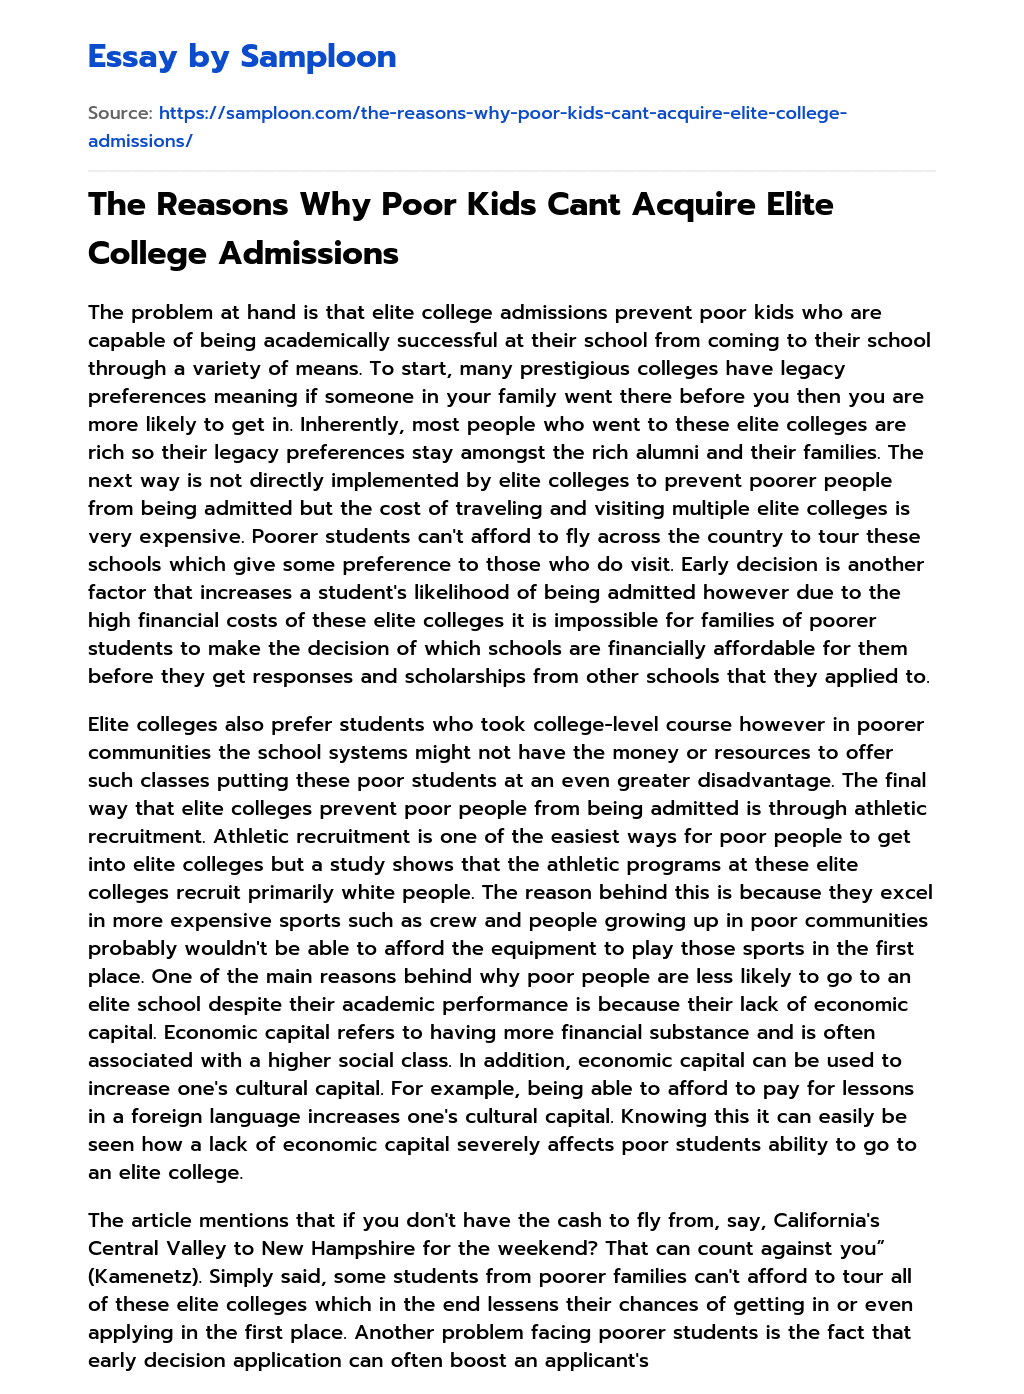 The Reasons Why Poor Kids Cant Acquire Elite College Admissions essay